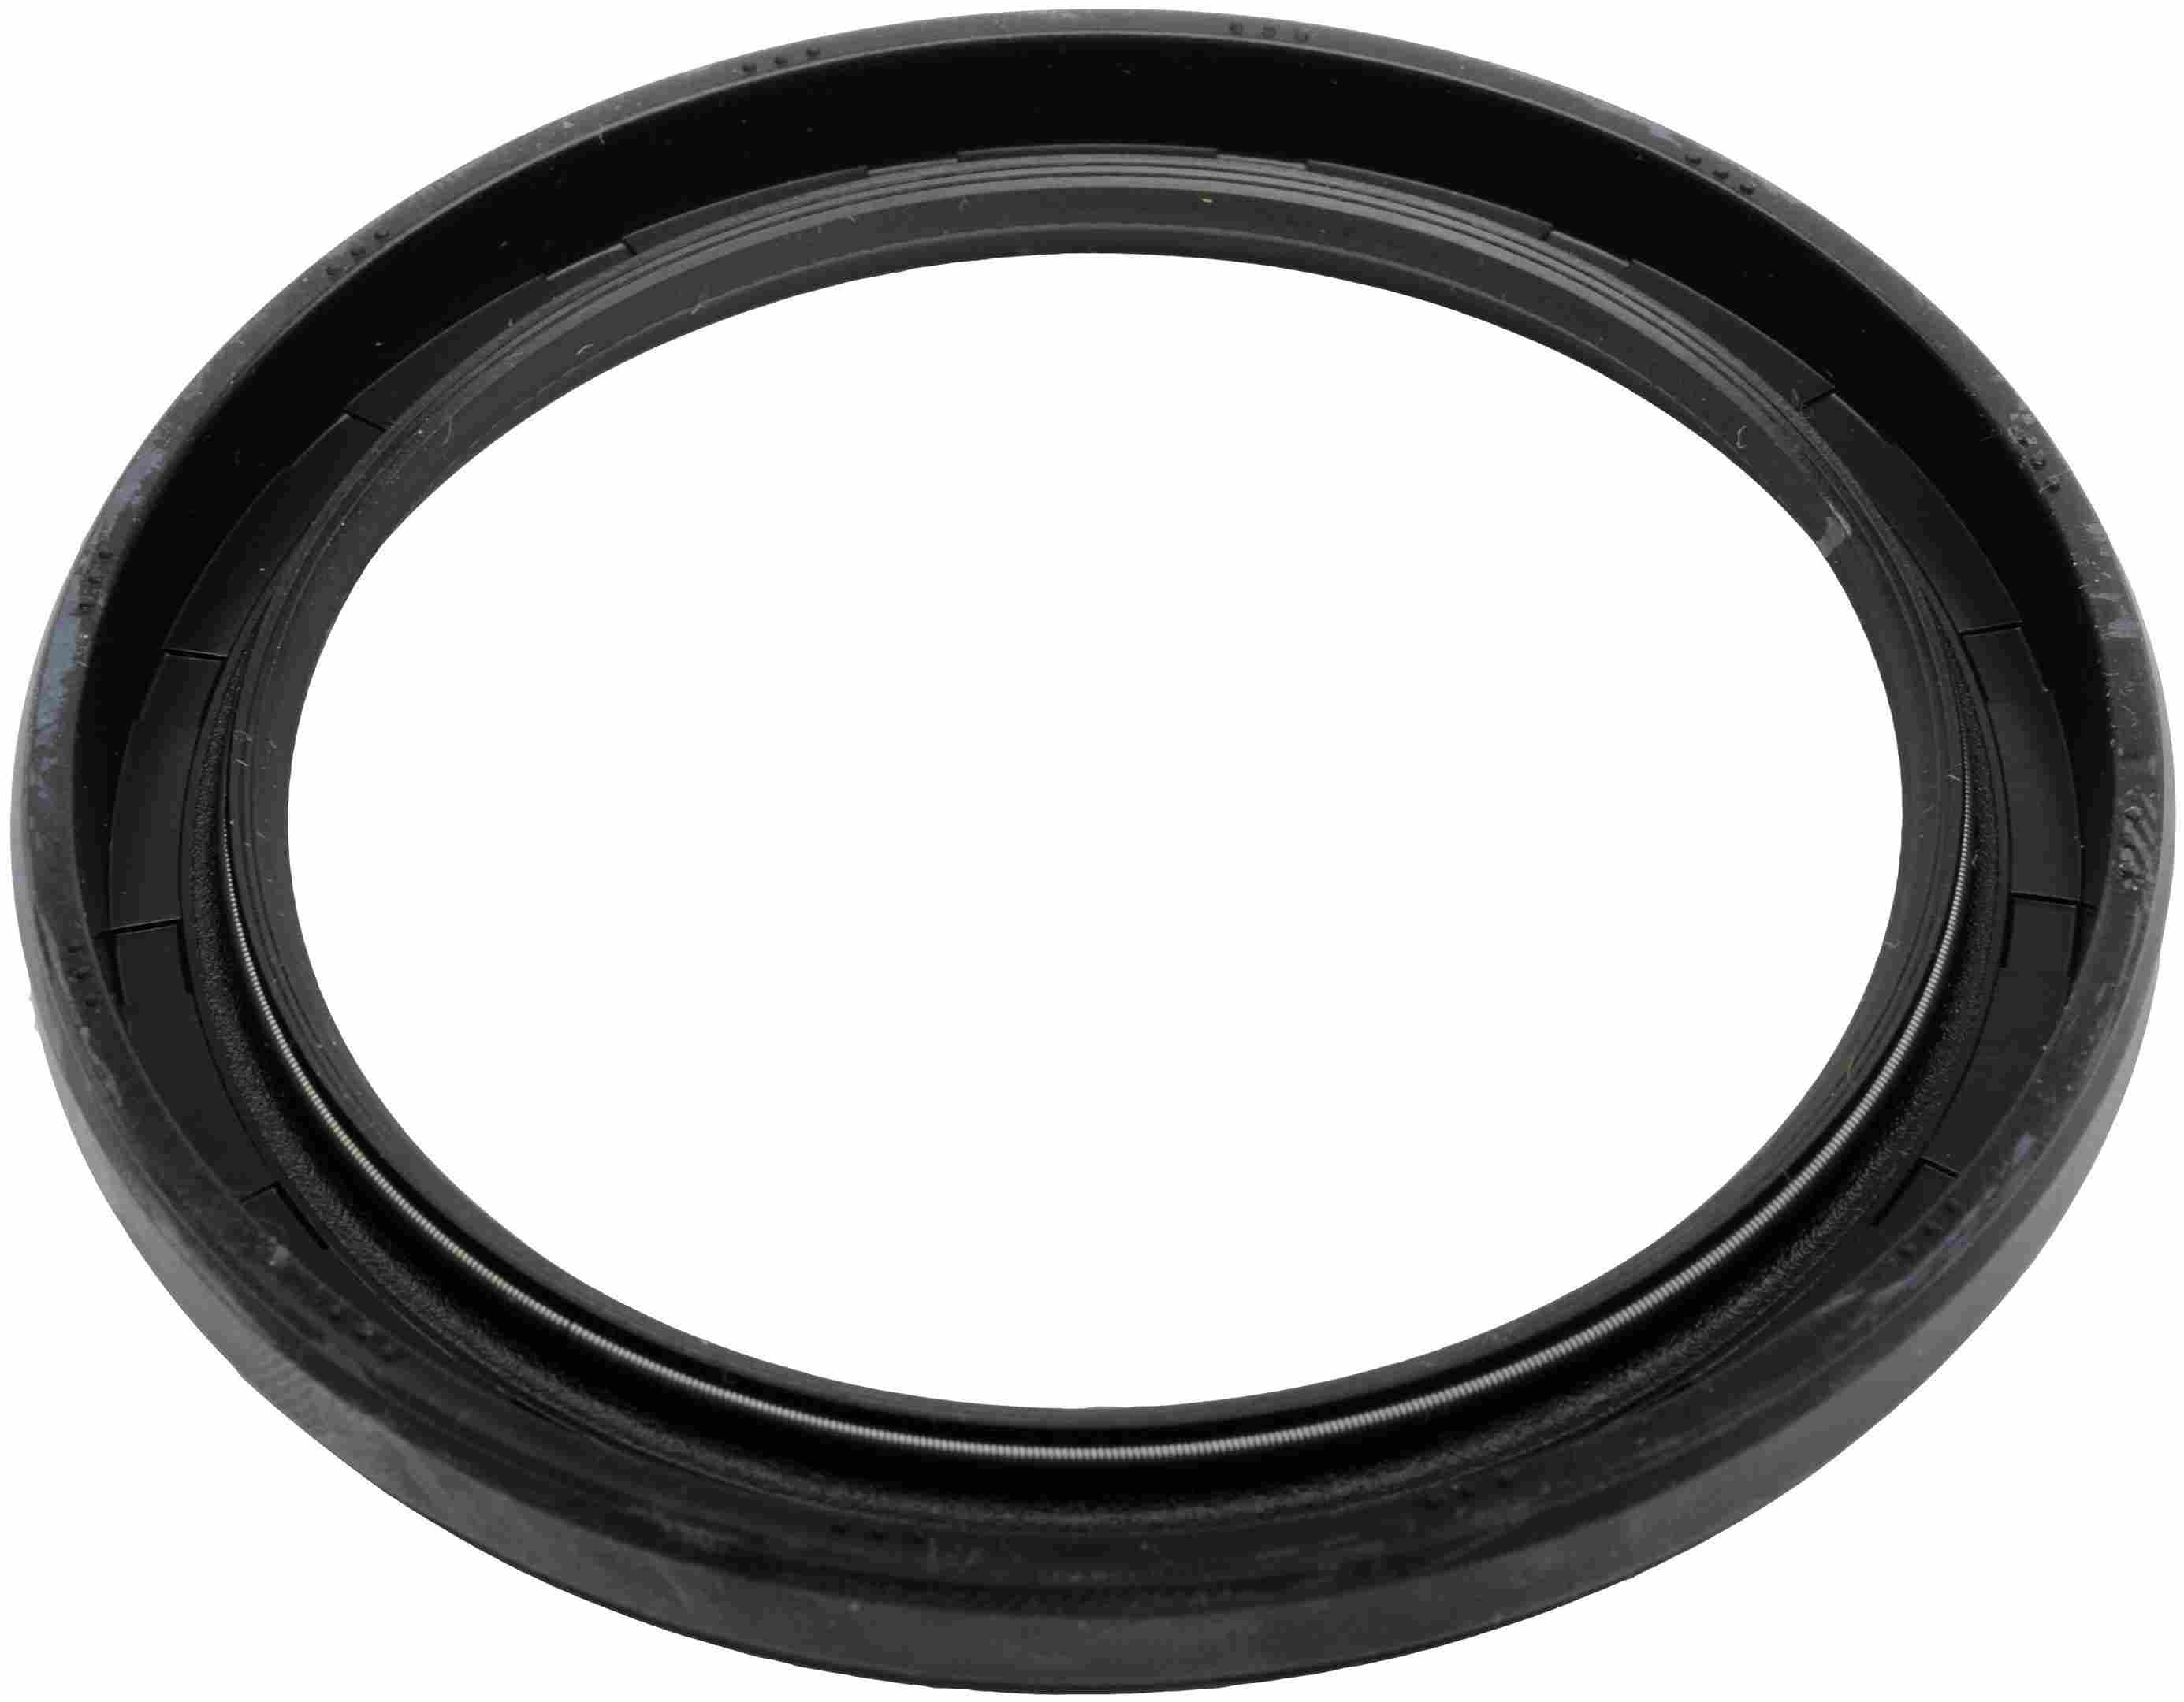 SKF Automatic Transmission Input Shaft Seal  top view frsport 26145